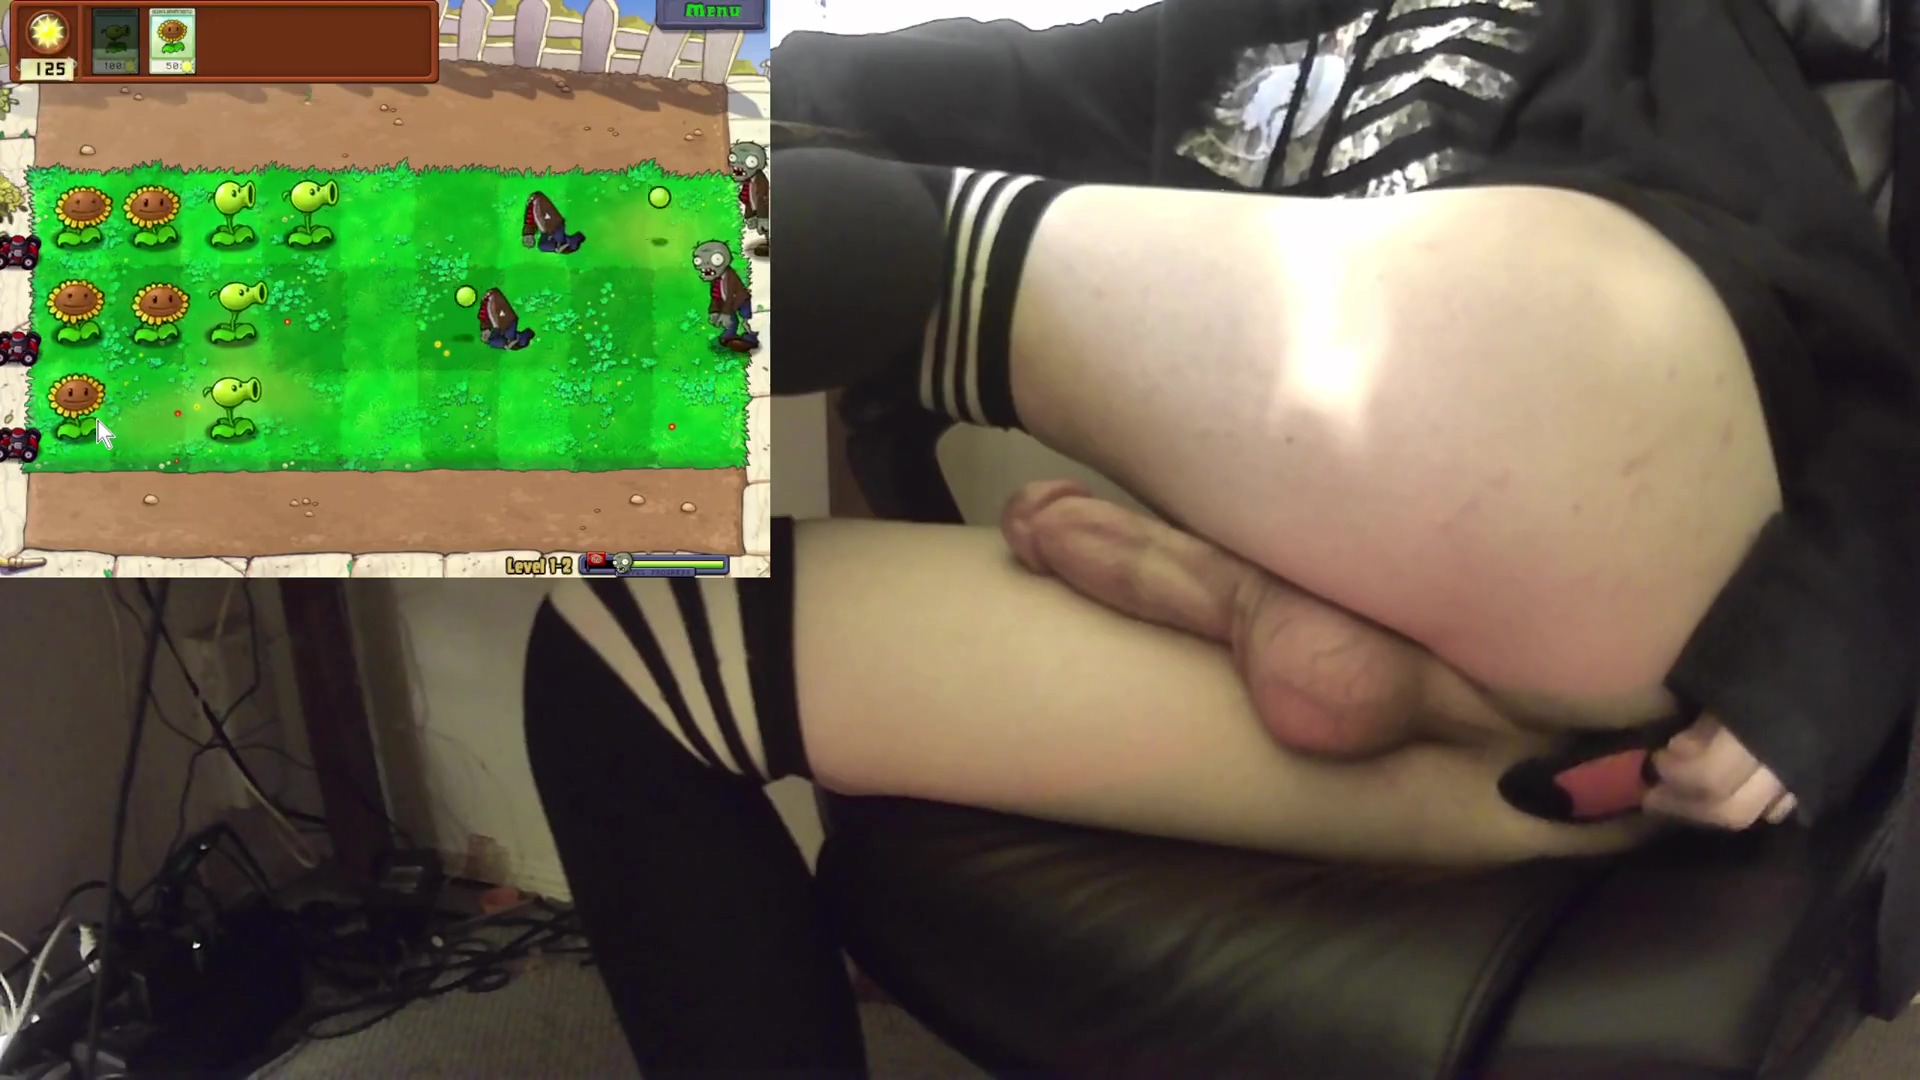 Femboy Gaming Plants Vs Zombies #1 + Thrusting Buttplug Shemale Porn Video - Shemale and Tranny Porn Tube